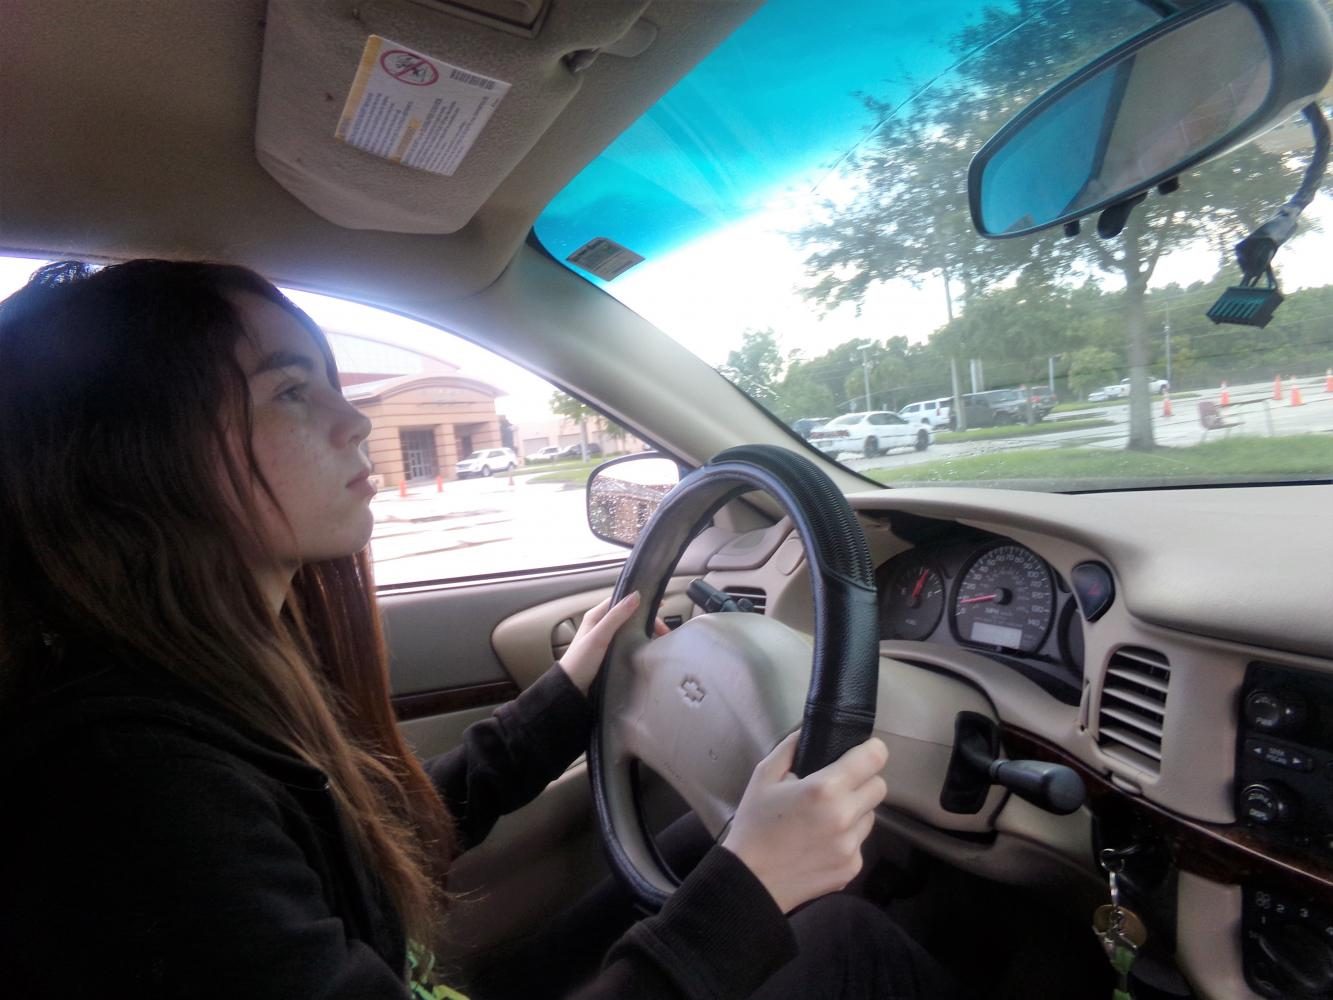 Sophomore Mary Fusca drives on the range, and practices checking her rearview mirrors. When driving on the road, it’s vital to always check the rear-view mirror every three to five seconds.